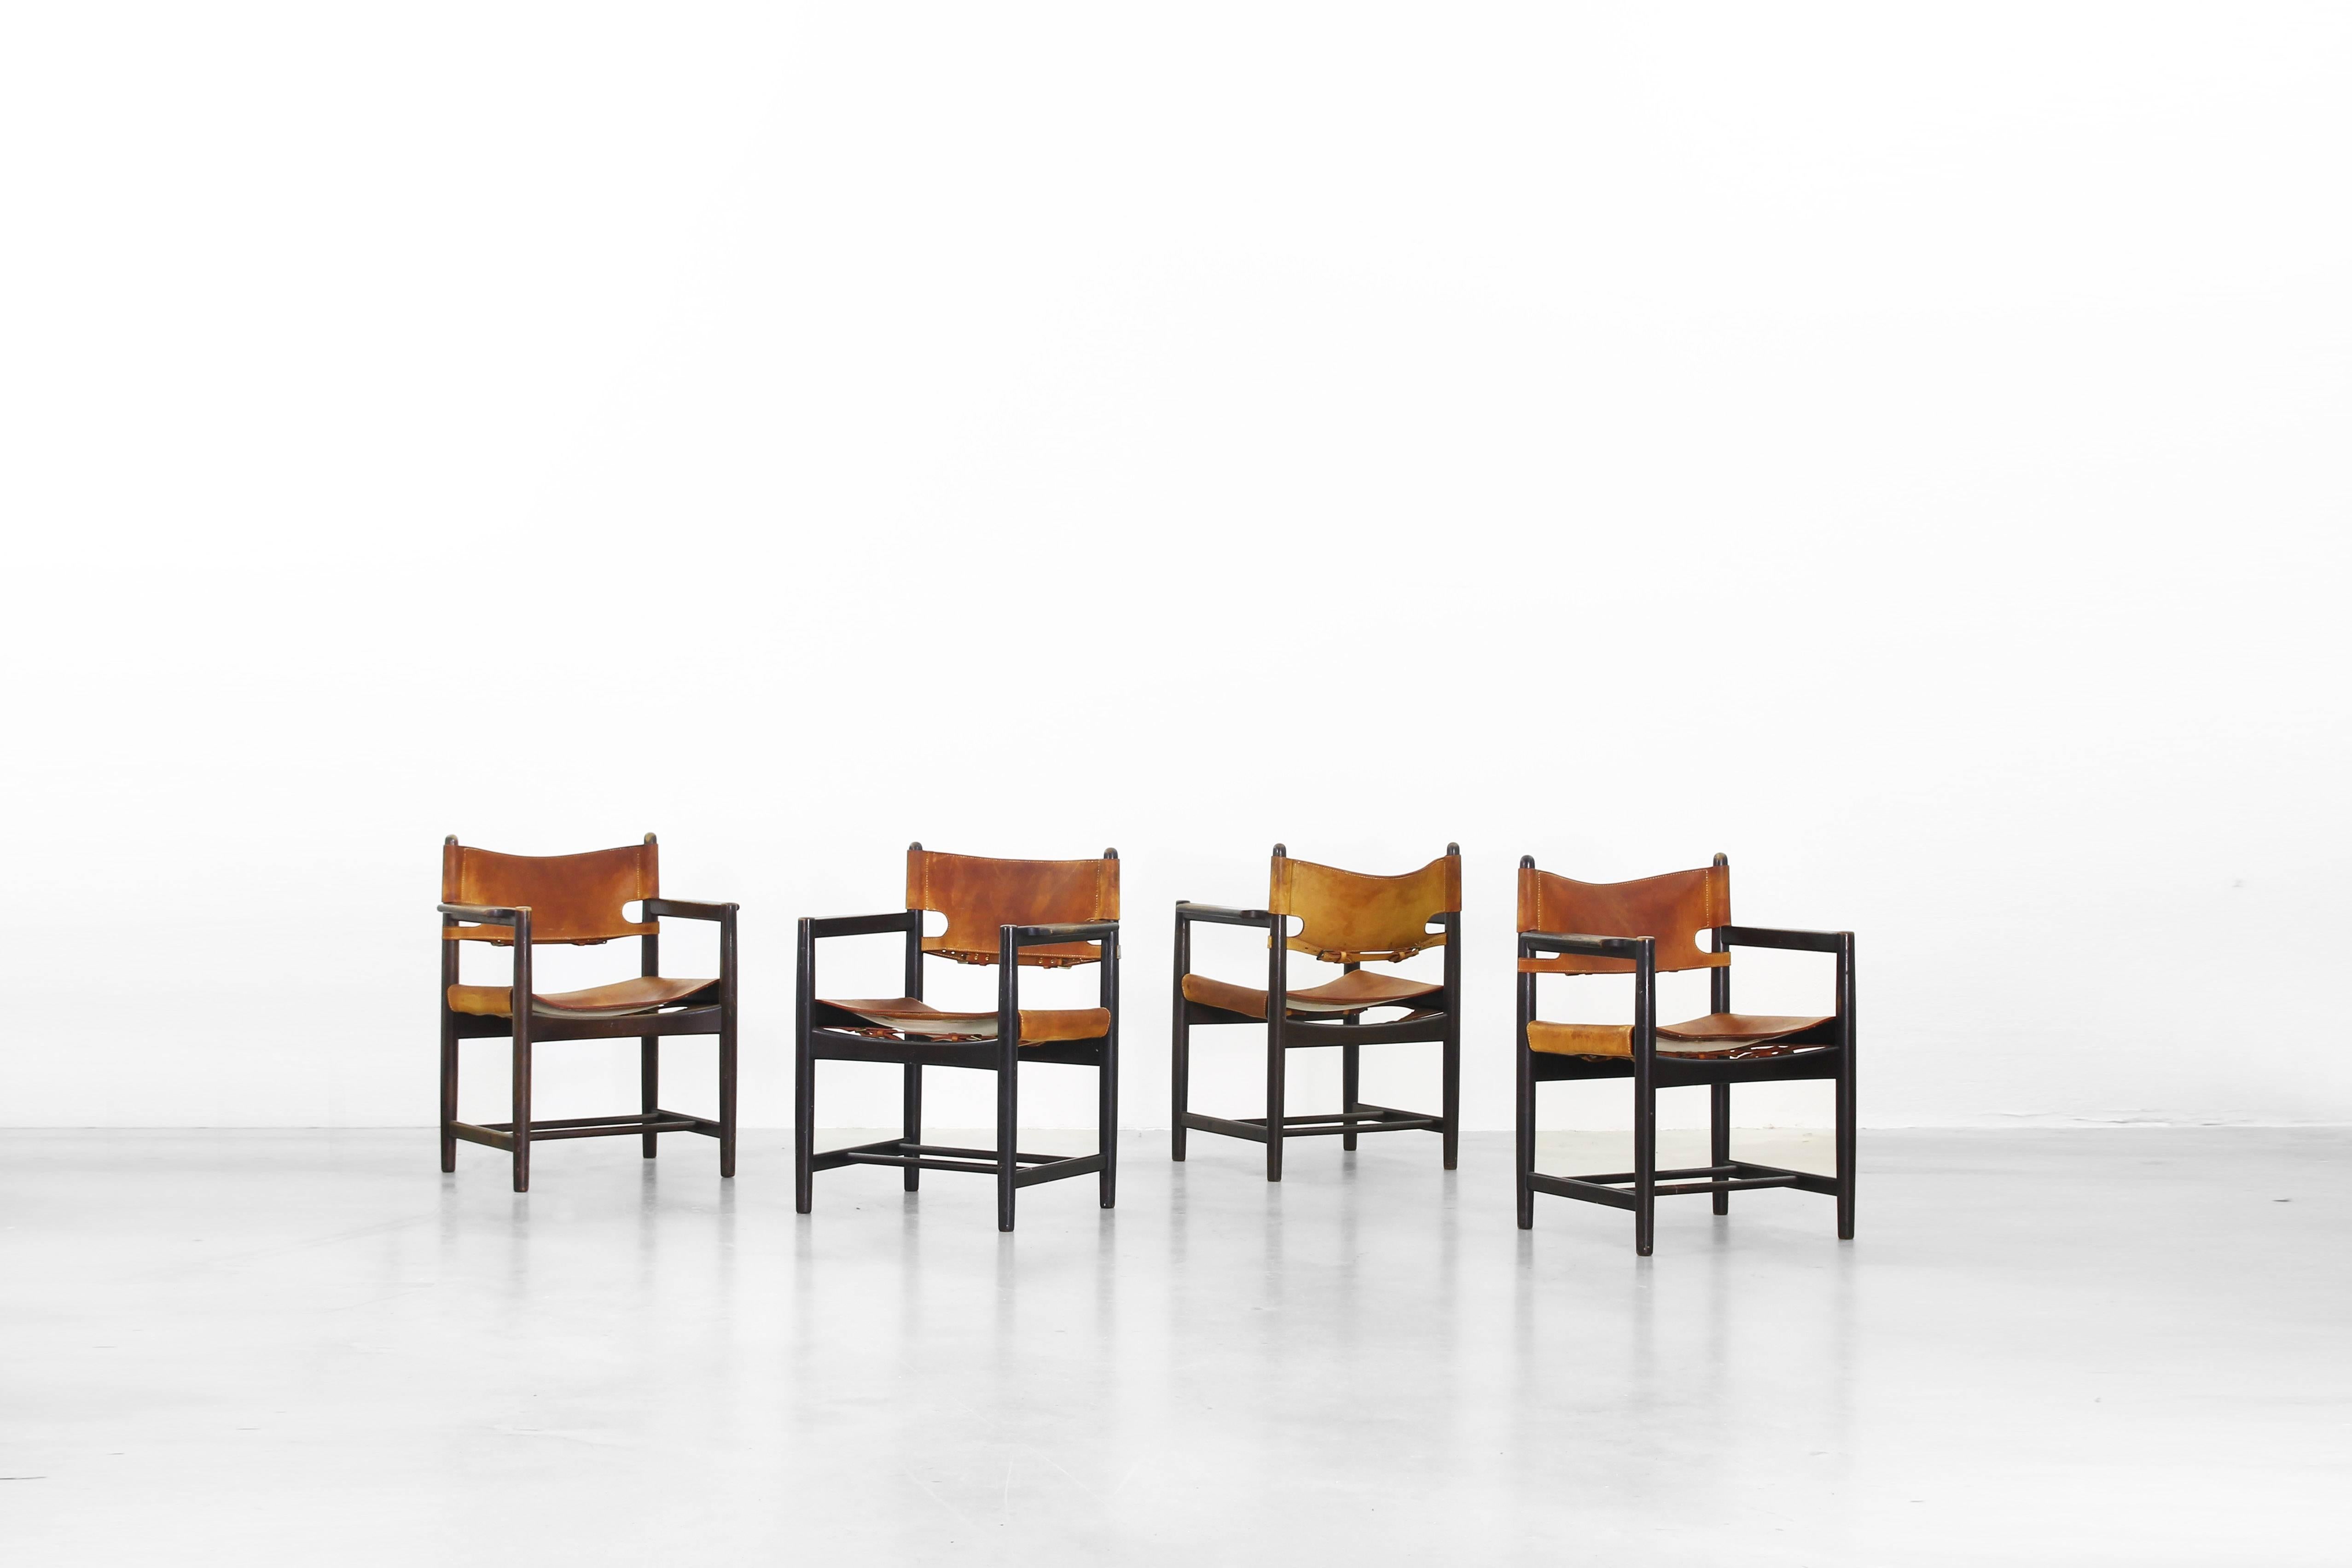 A beautiful set of four dining chairs designed by Børge Mogensen for Fredericia in the 1950s.
All chairs are made of stained oak and patinated leather and all are in a good used condition with visible traces of usage.